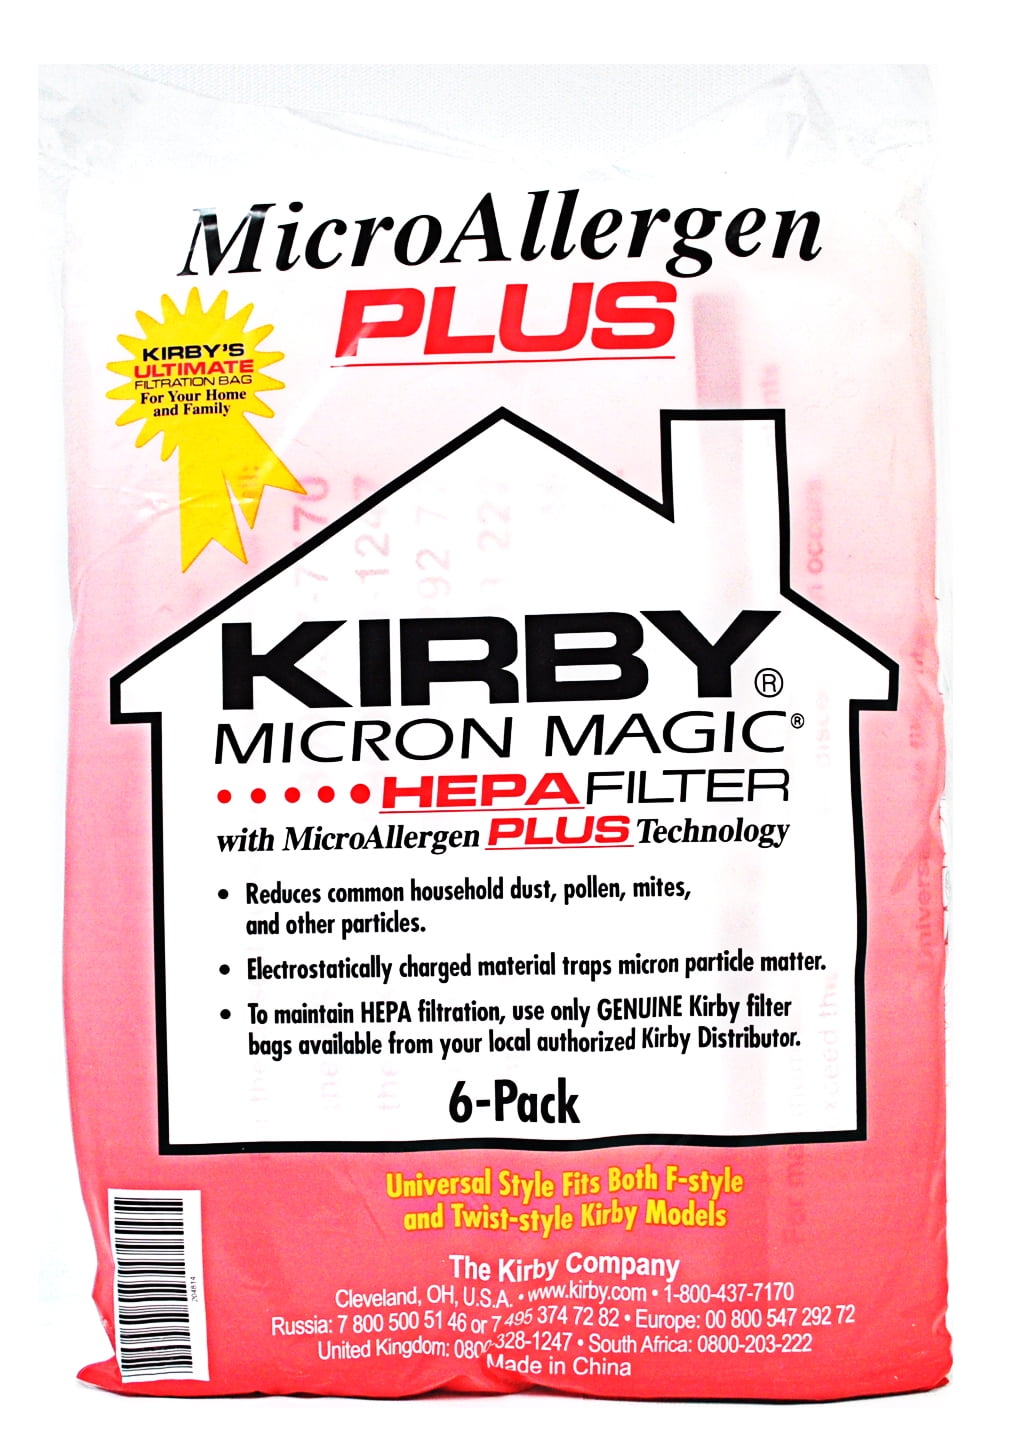 G5 HEPA micron magic filtration 9 Paper Bgs # 197394A Kirby G4 